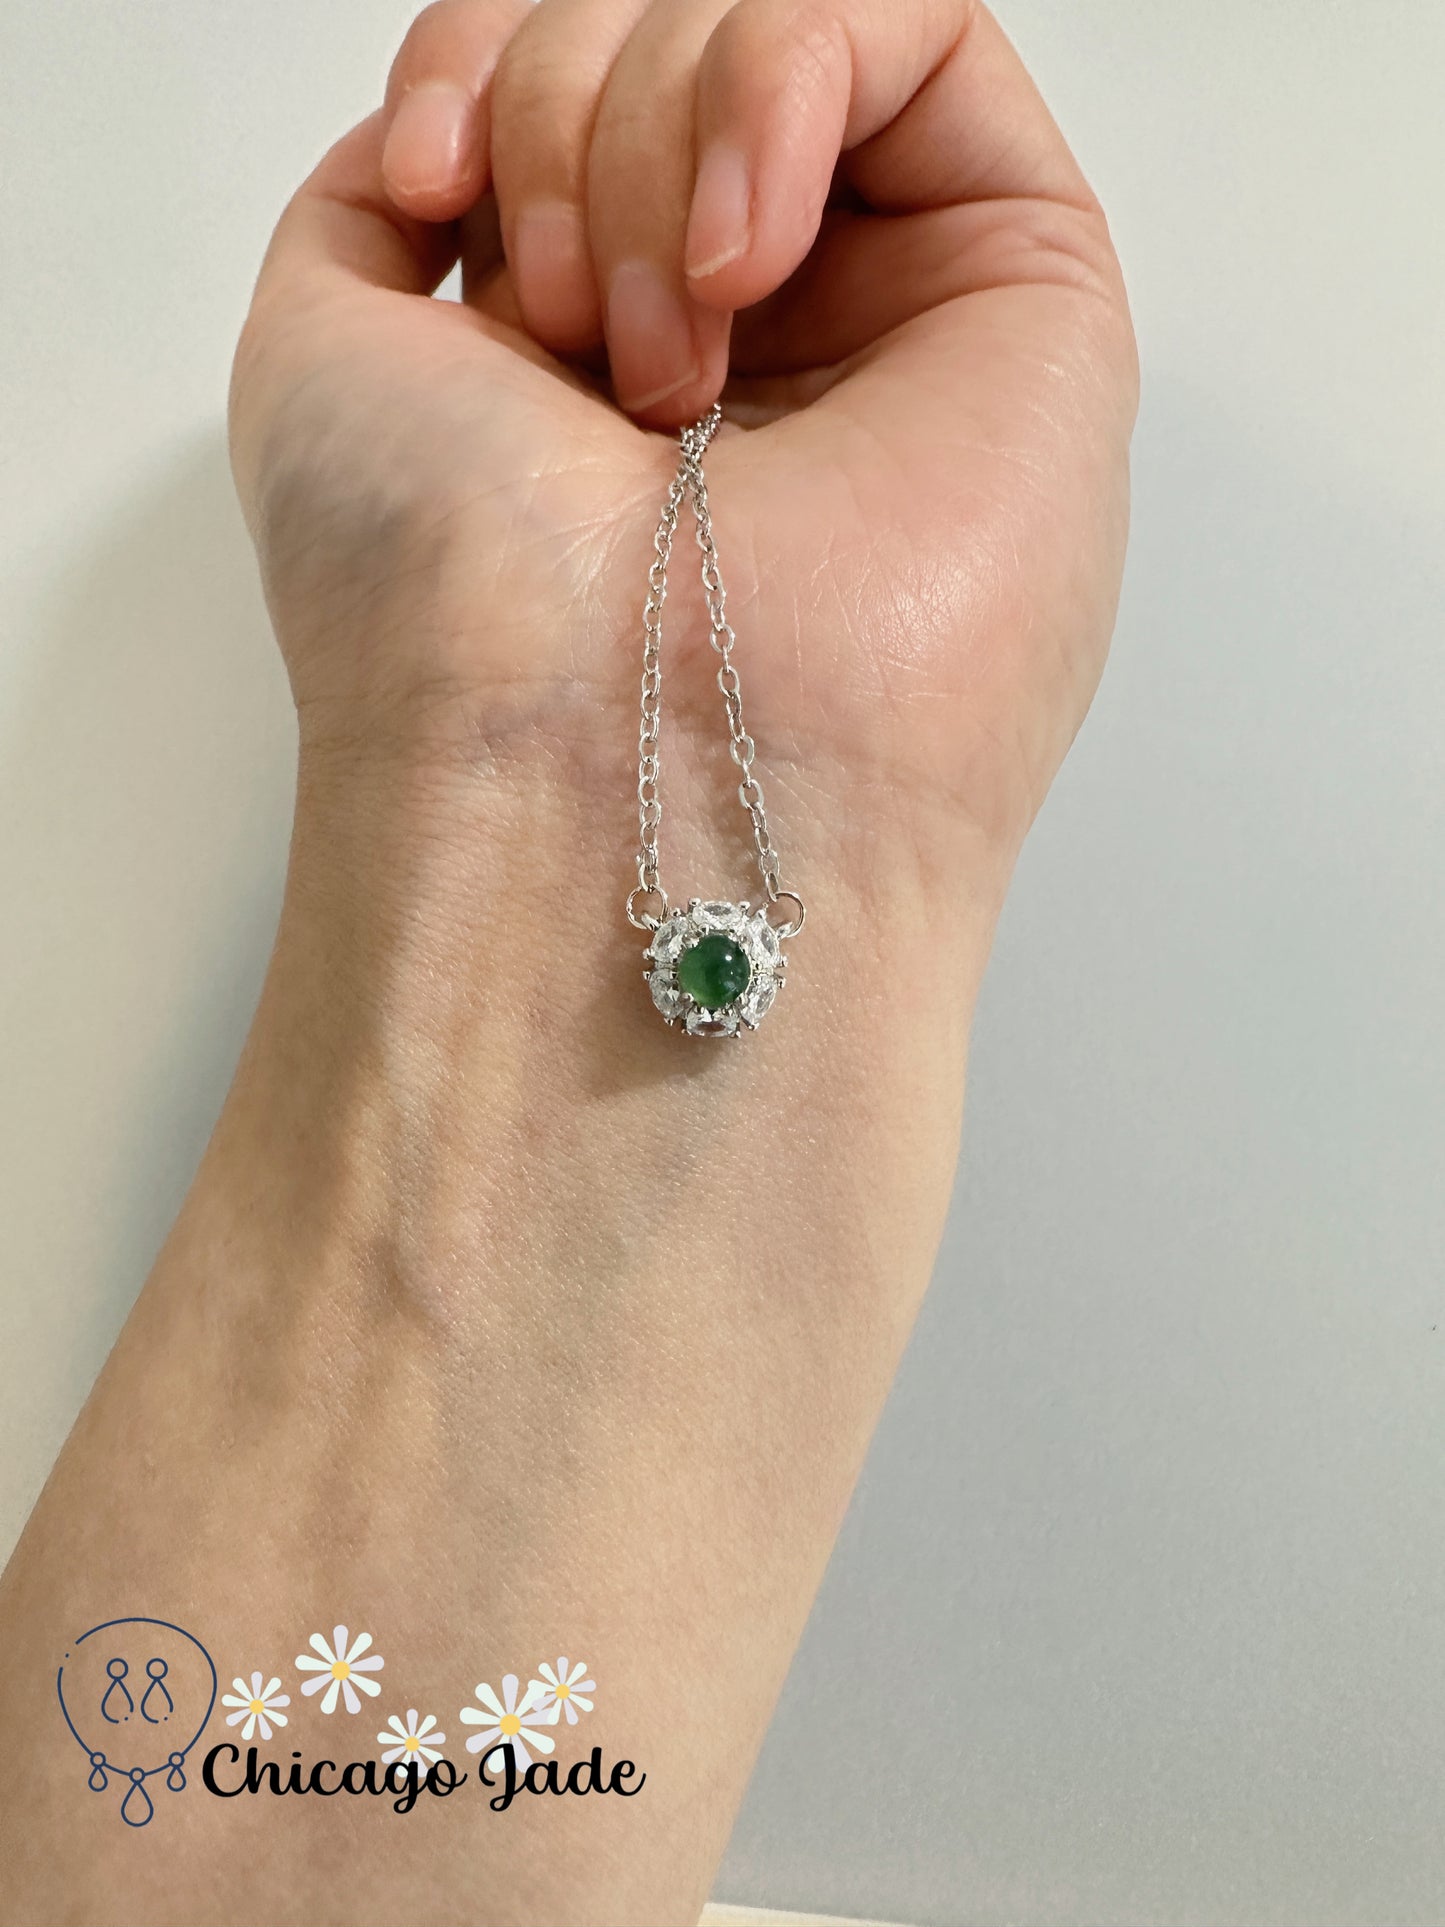 Jade Pendant Necklace, 18 inches, Sterling Silver, Green Jadeite Stone, Handmade